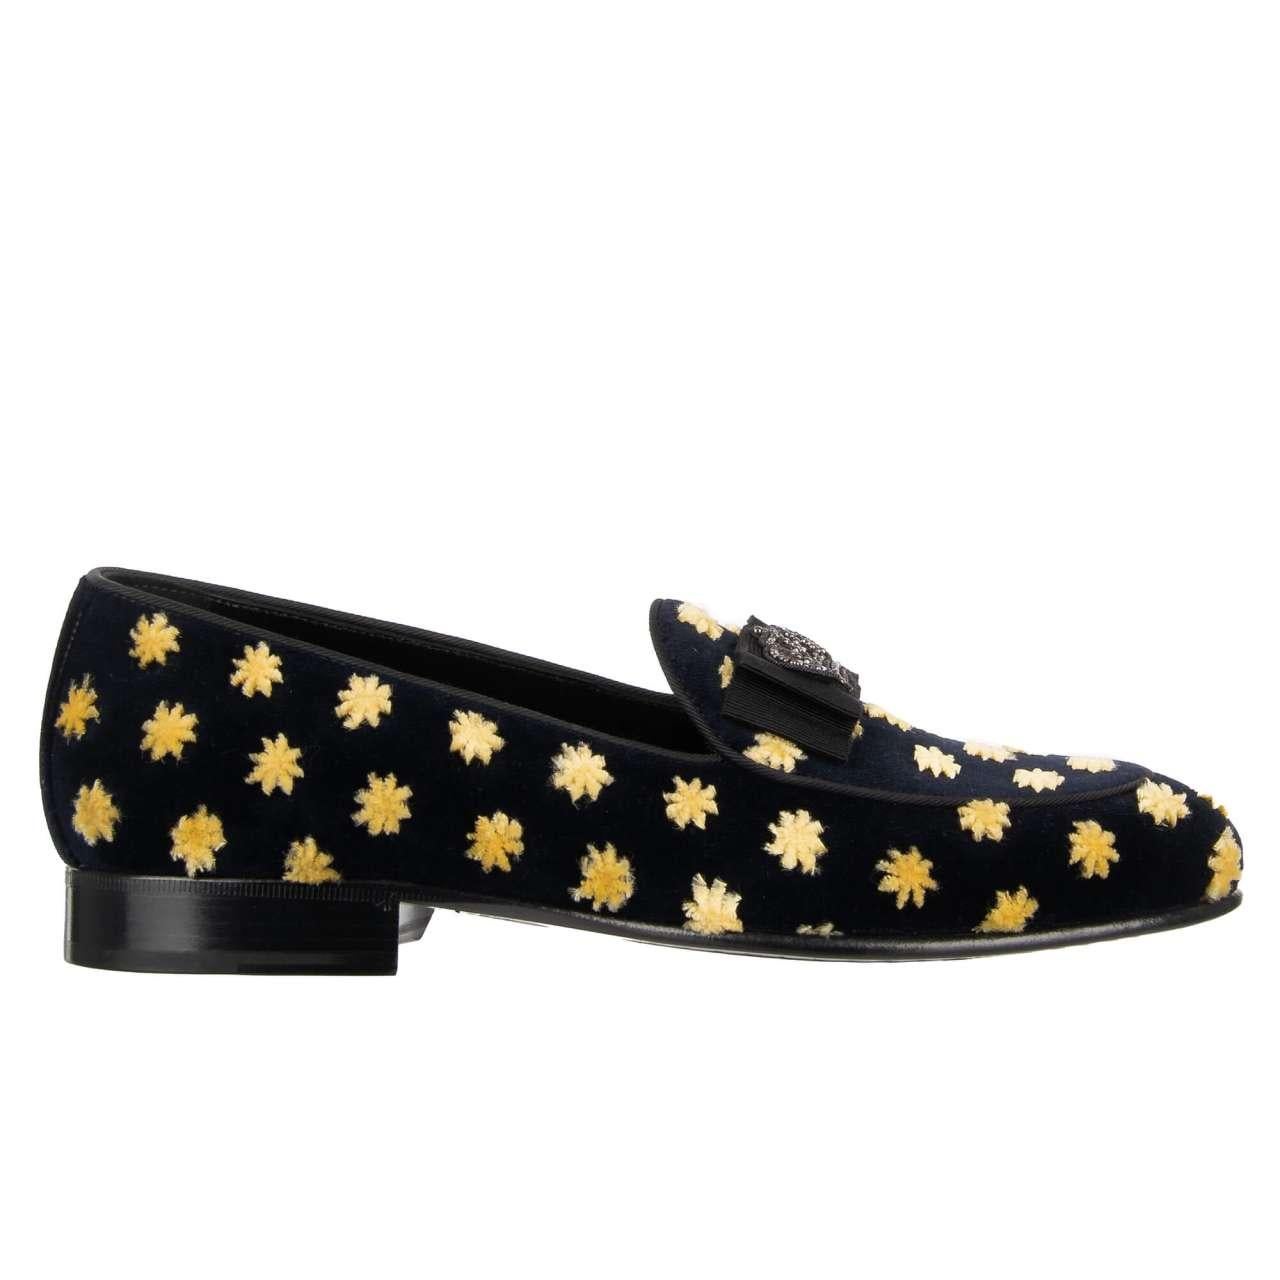 - Velvet loafer shoes NEW LUKAS with embroidered crown ribbon and stars pattern in black by DOLCE & GABBANA - MADE IN ITALY - Former RRP: EUR 745 - New with Box - Model: A50180-AV086-8S748 - Material: 100% Cotton - Sole: Leather - Color: Black -